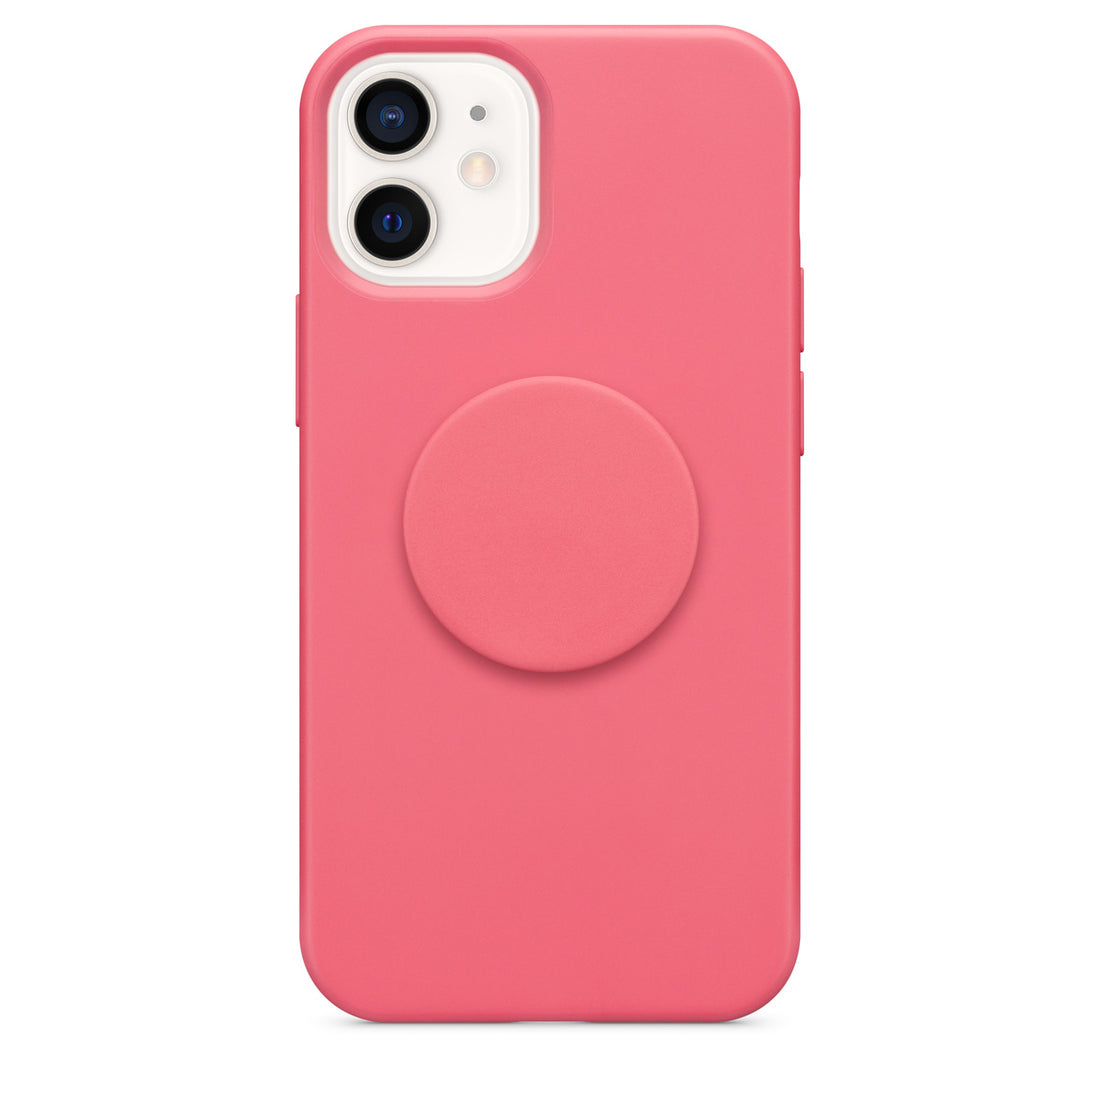 OtterBox + POP Ultra Slim Soft Touch Case for Apple iPhone 12 Mini-Tea Rose Pink (New)